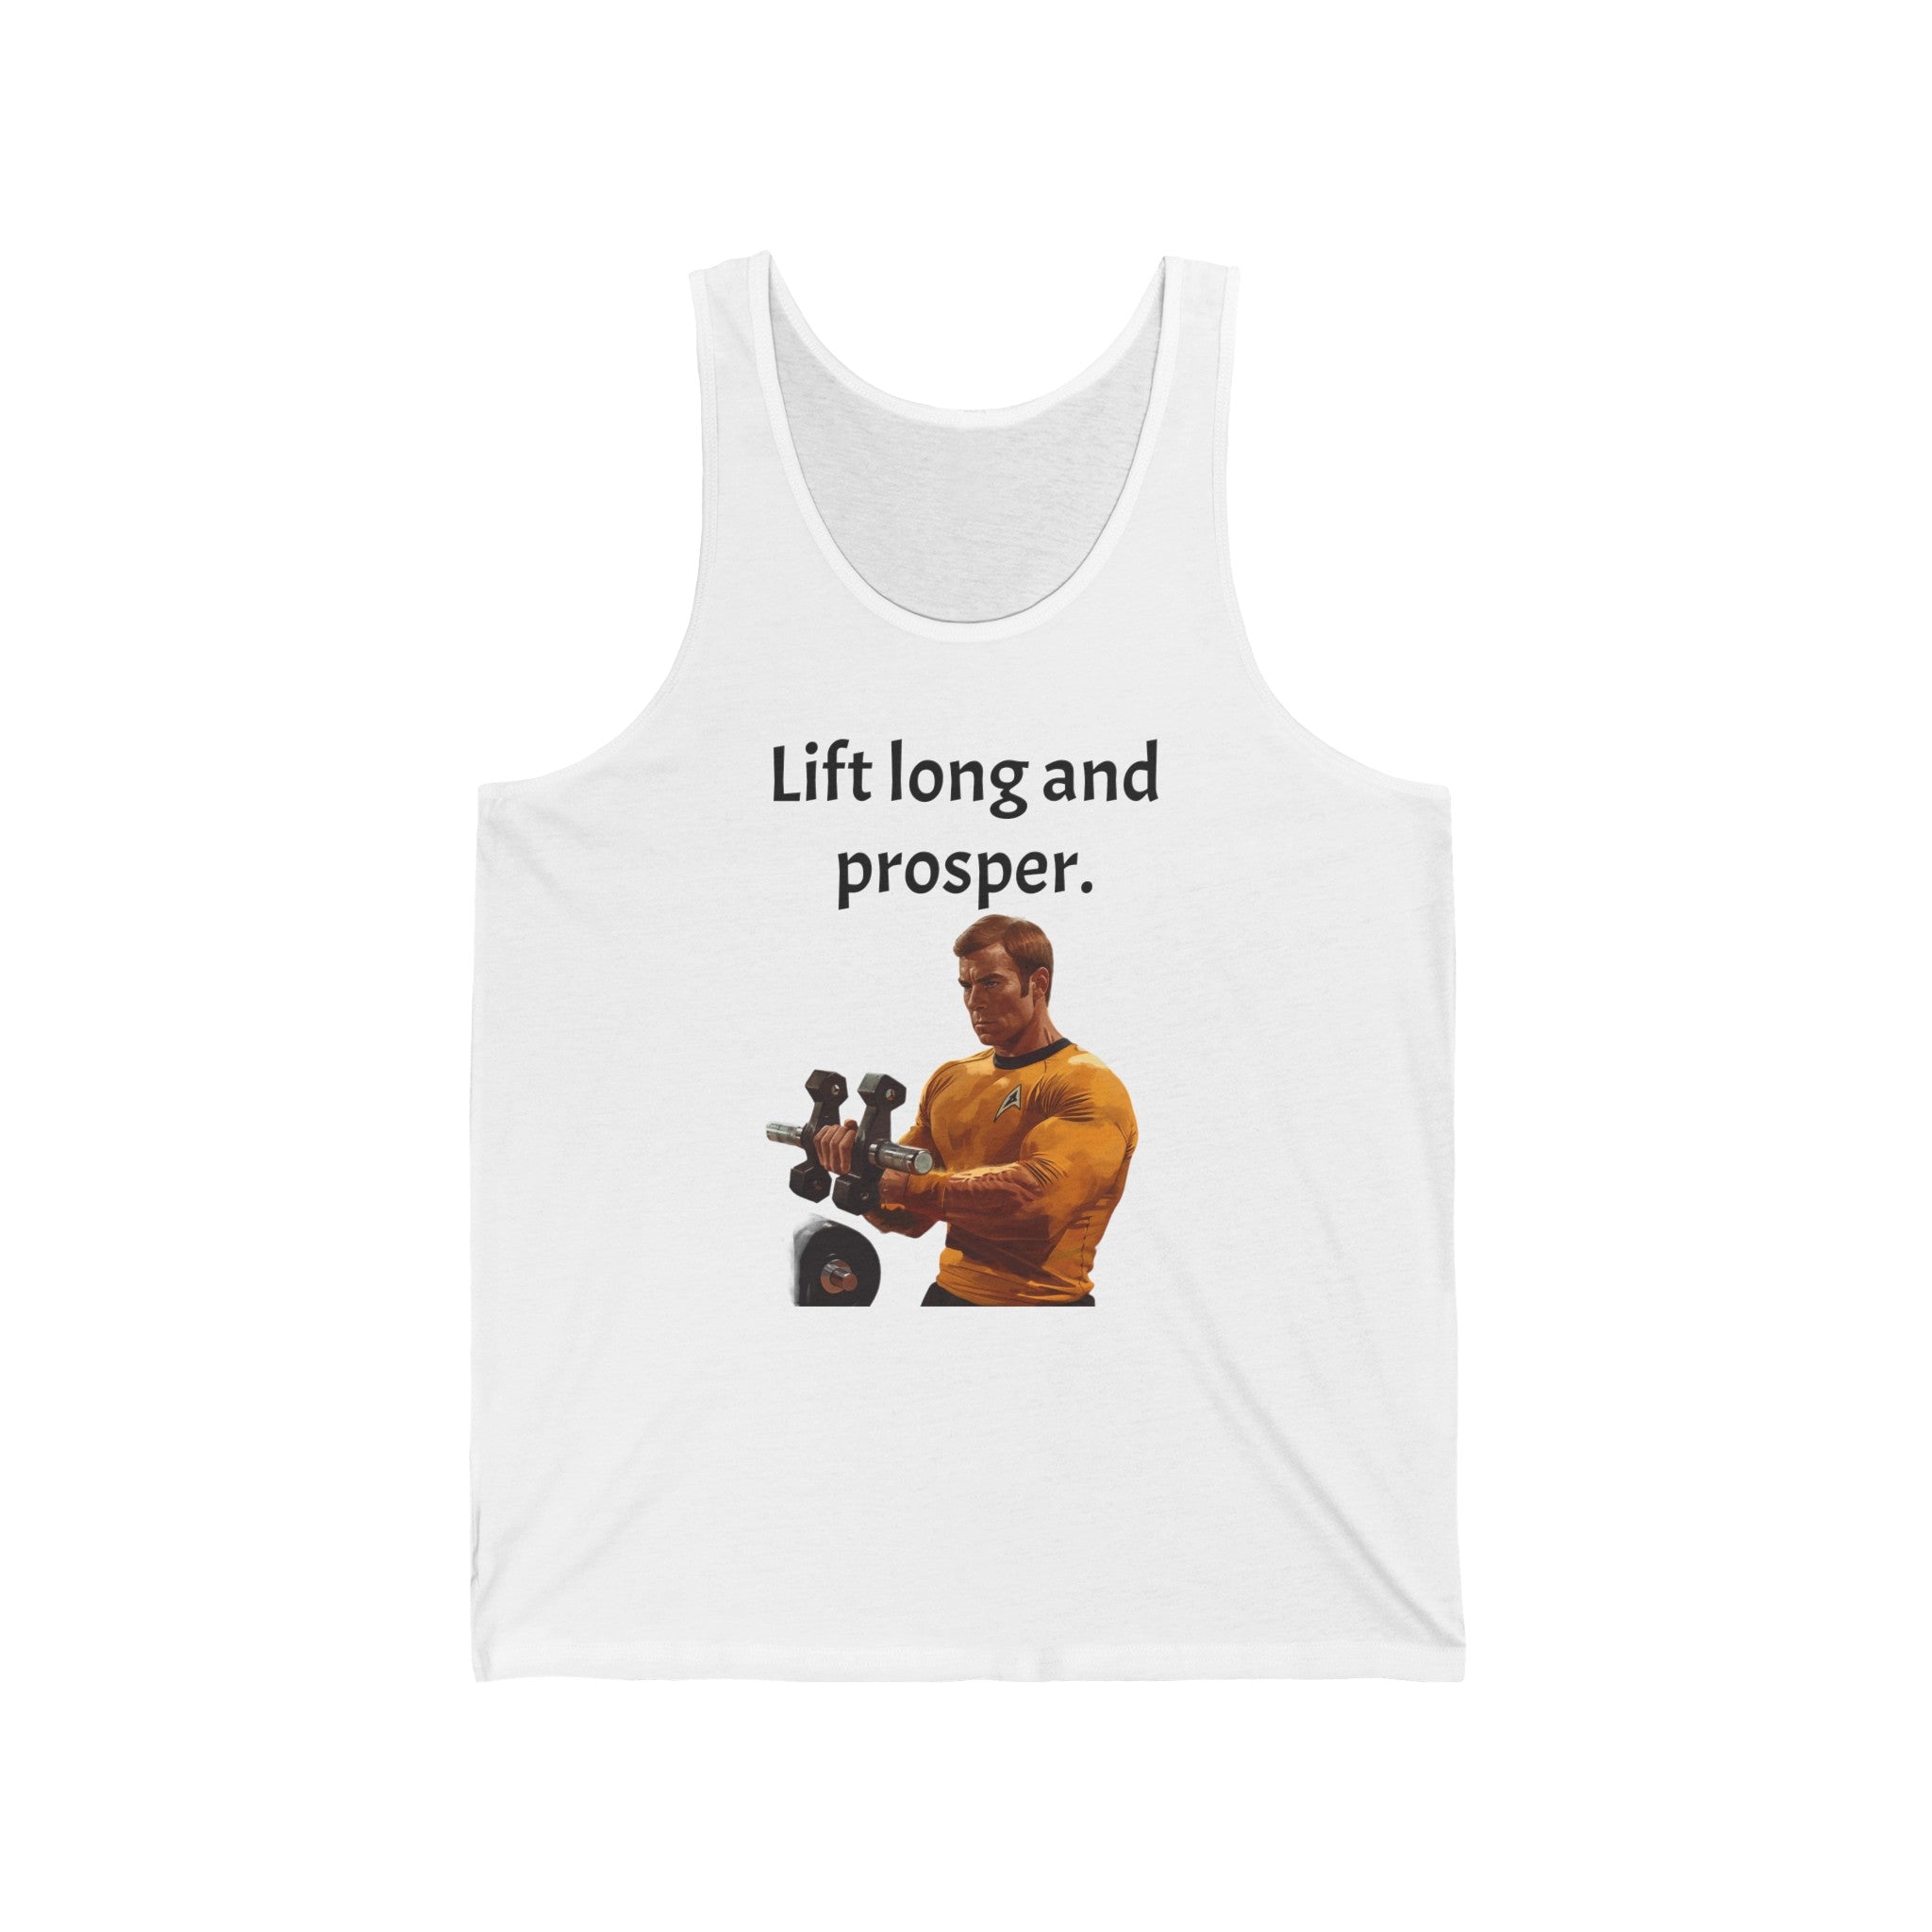 The image displays a stylish unisex jersey tank, featuring the humorous and iconic phrase "Lift Long and Prosper" in bold, sci-fi inspired typography. The tank’s comfortable fit and breathable fabric are evident, making it perfect for workouts or casual wear.